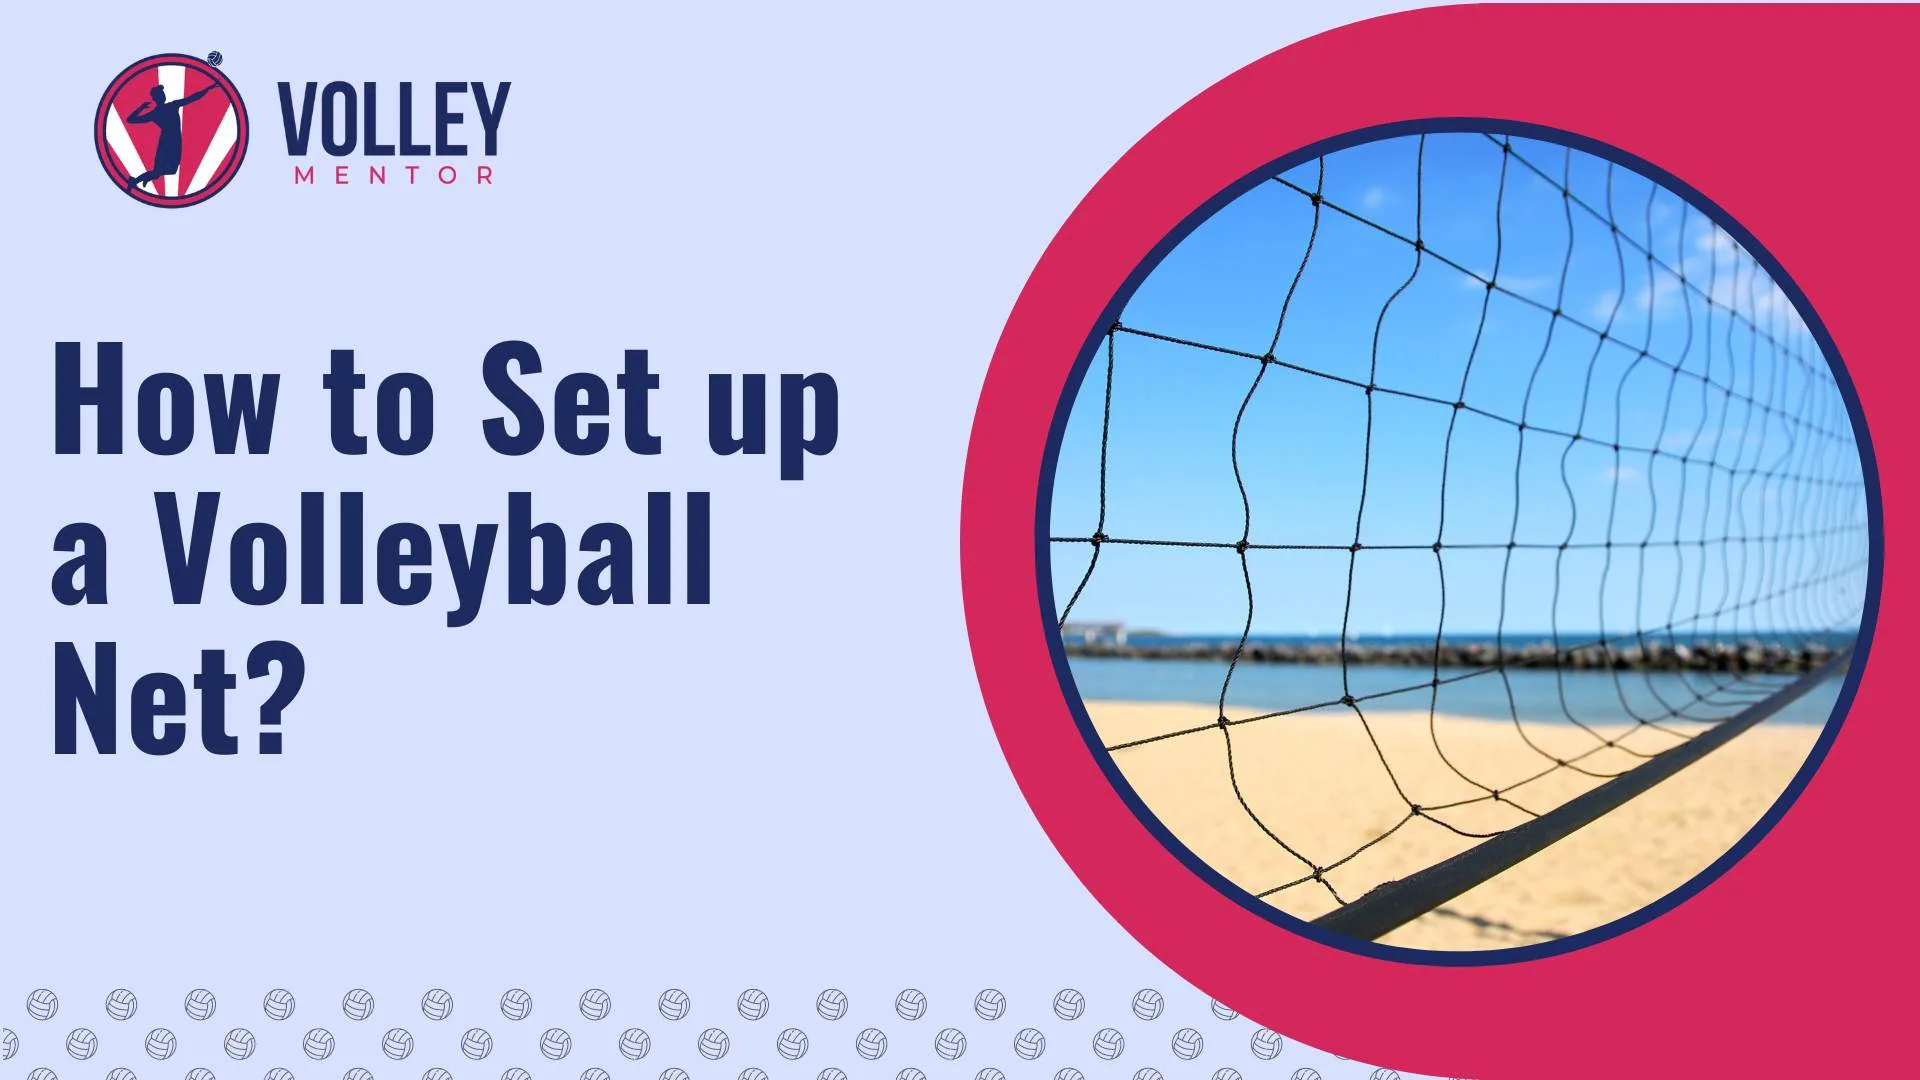 How to set up a volleyball net